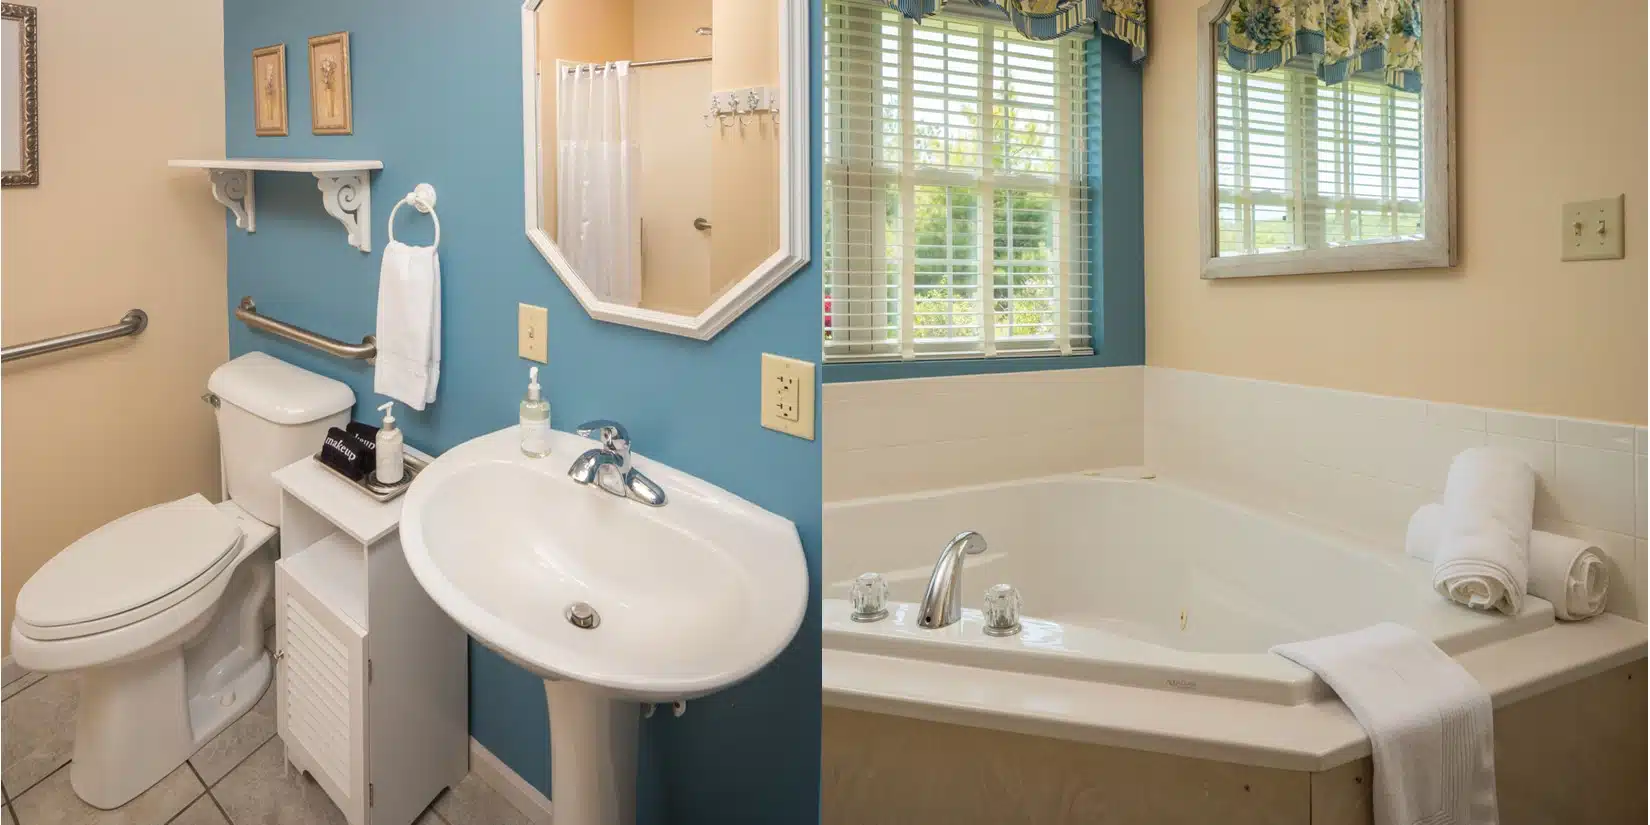 Split picture wth left showing toilet, sink and reflection of shower in mirror with blue Walls, Right picture shows whrilpool tub with window and mirror above